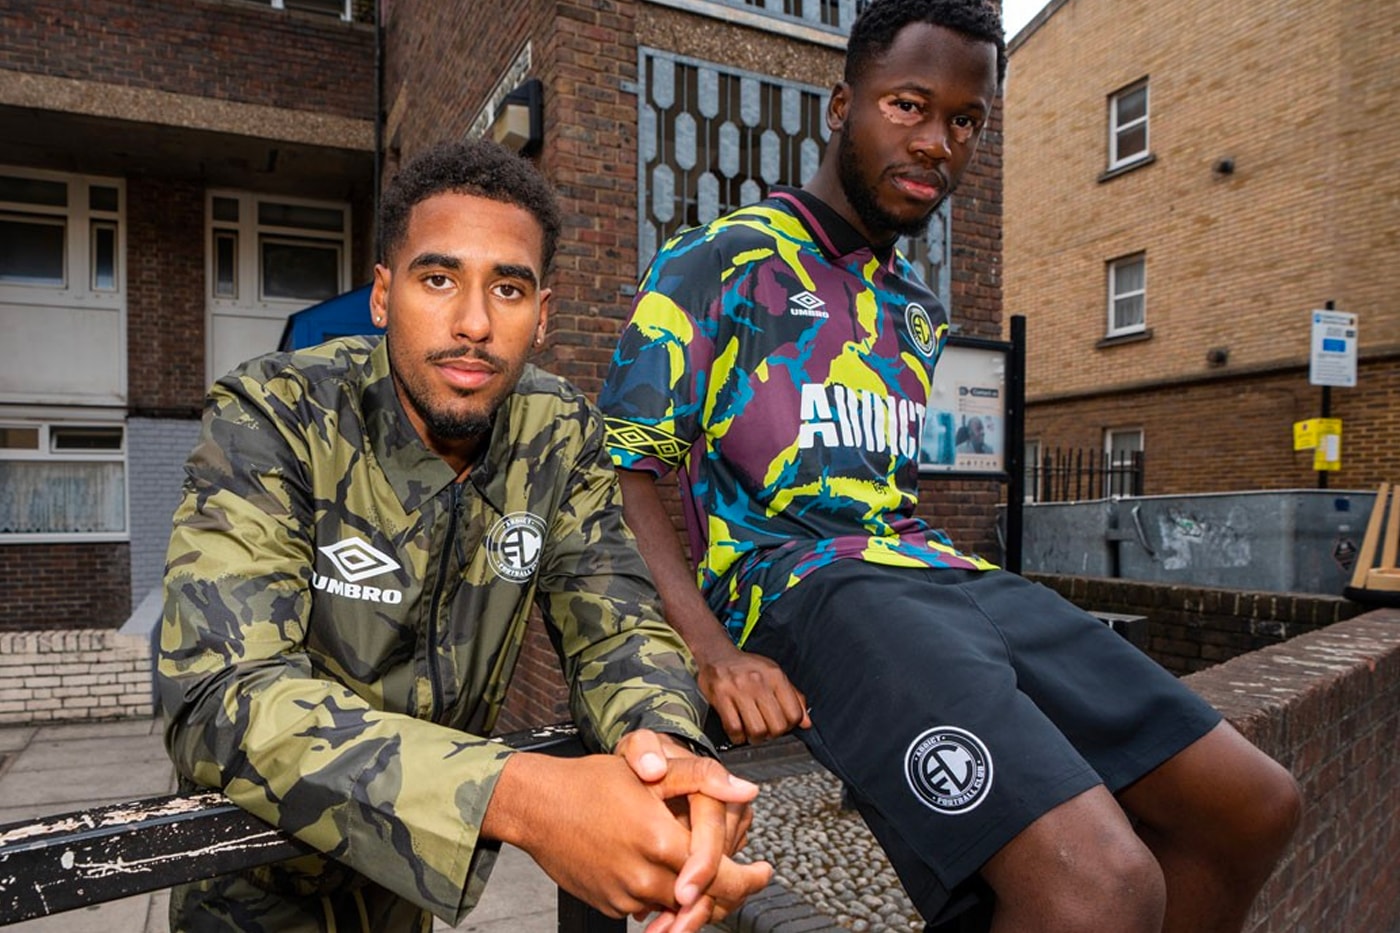 Umbro Links Up With Addict for Limited-Edition Capsule Fashion